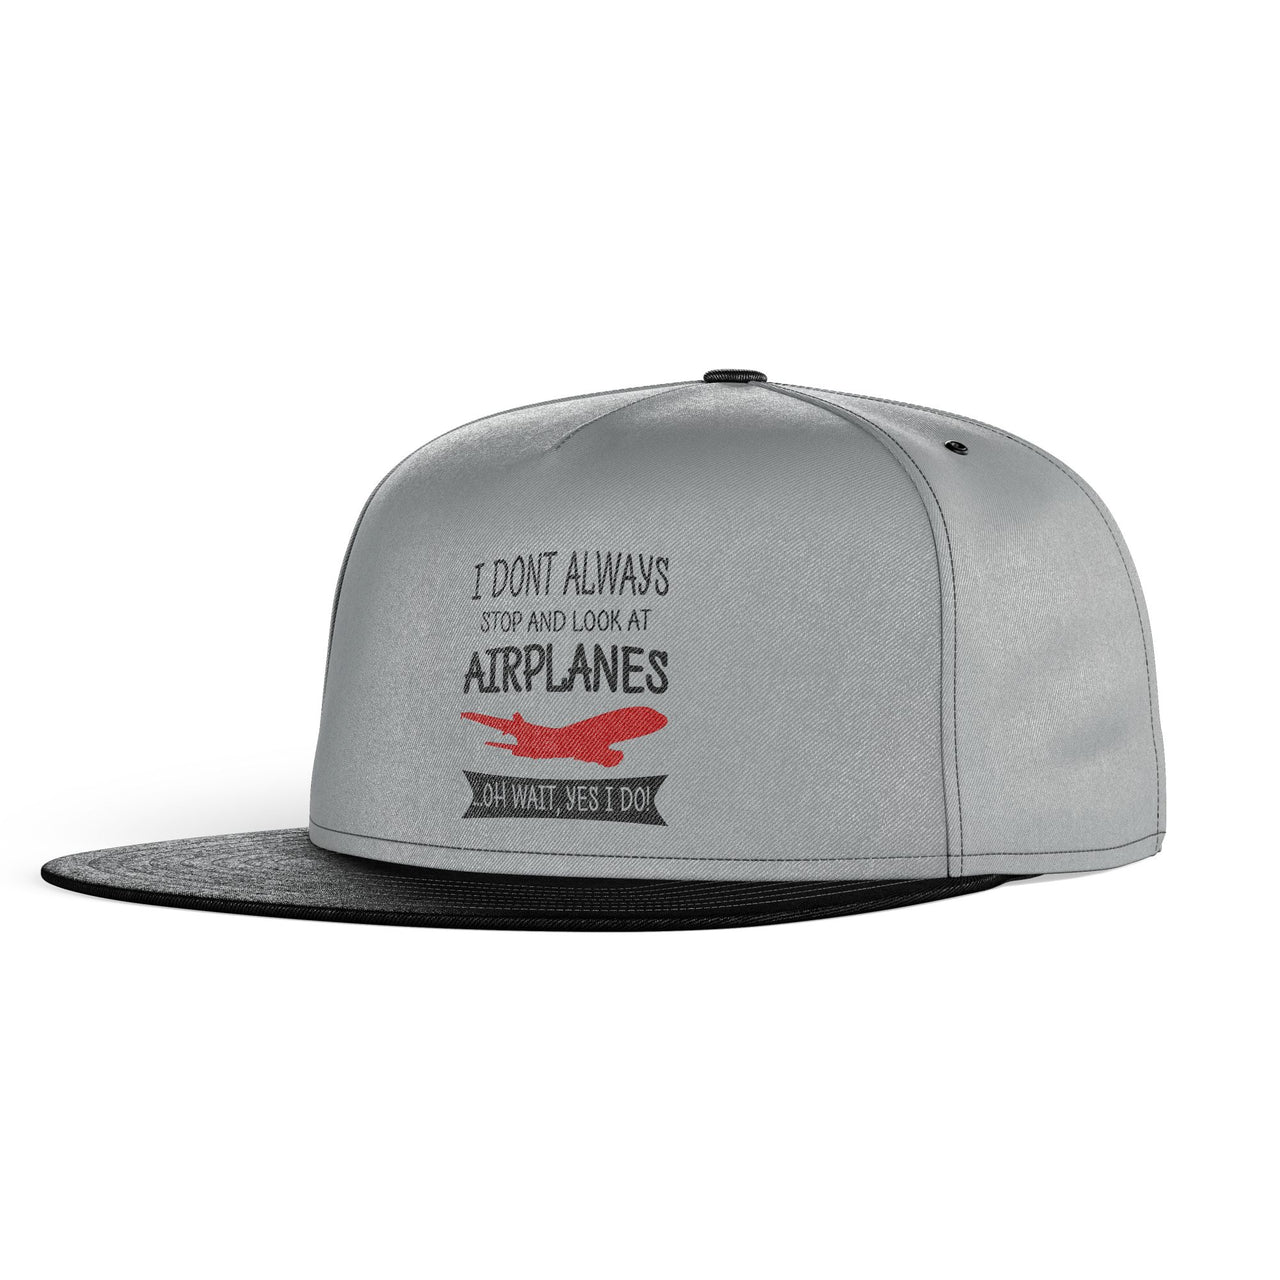 I Don't Always Stop and Look at Airplanes Designed Snapback Caps & Hats